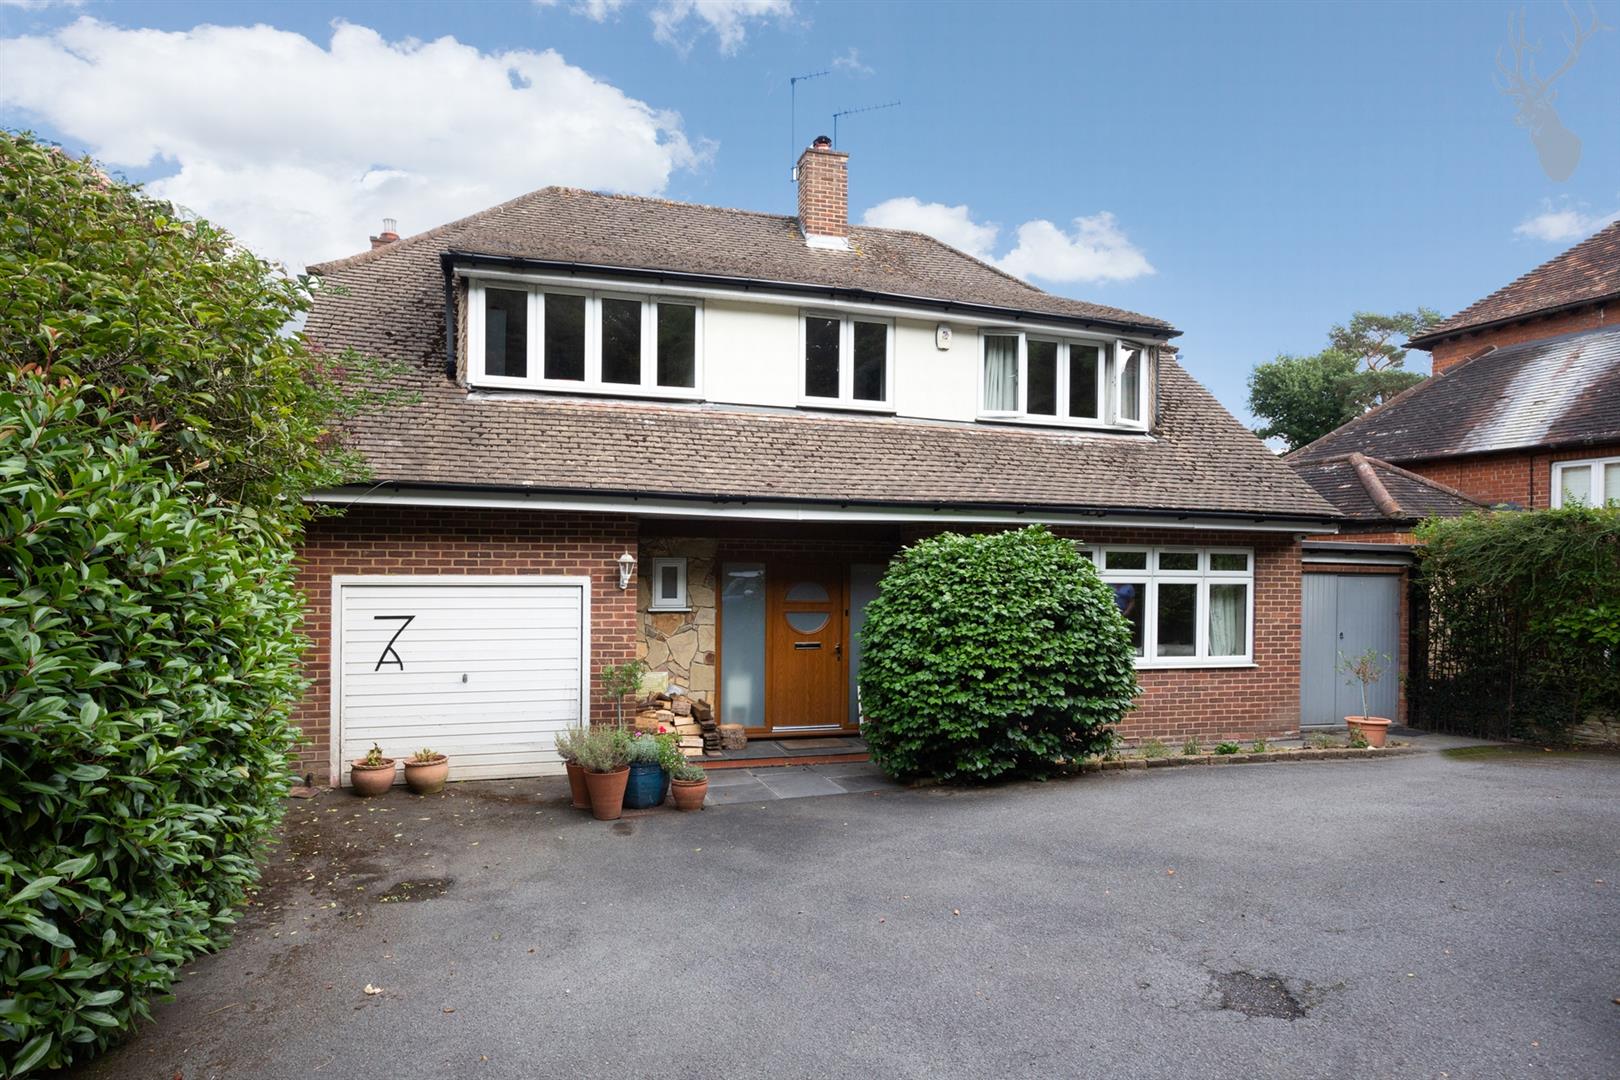 Similar Property: House - Detached in Theydon Bois